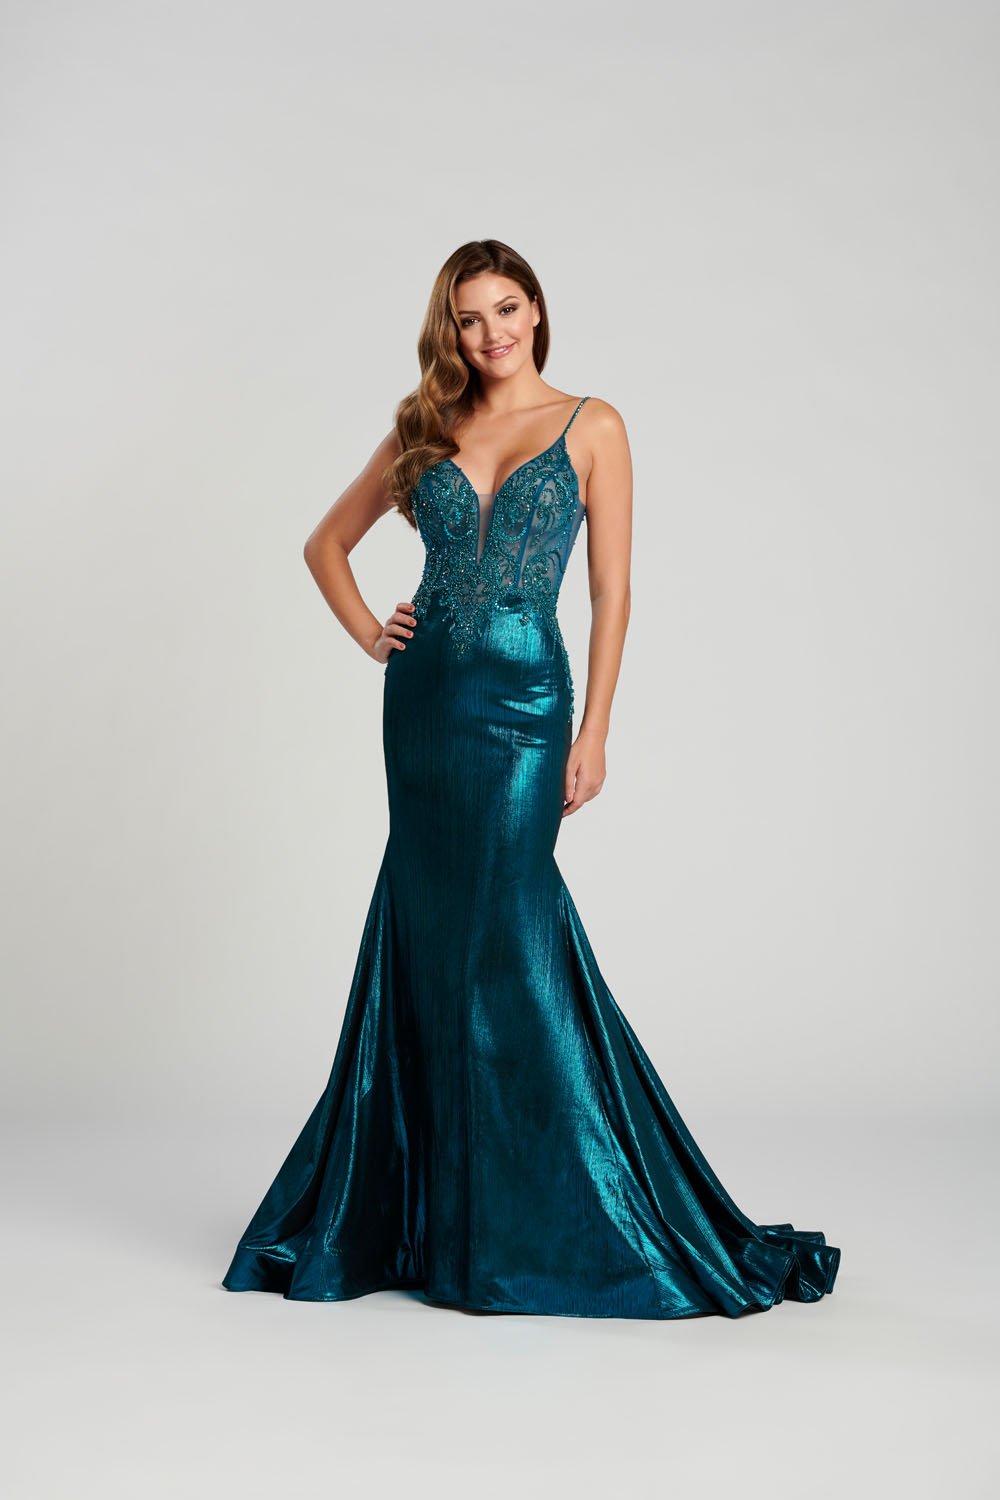 teal and black prom dress